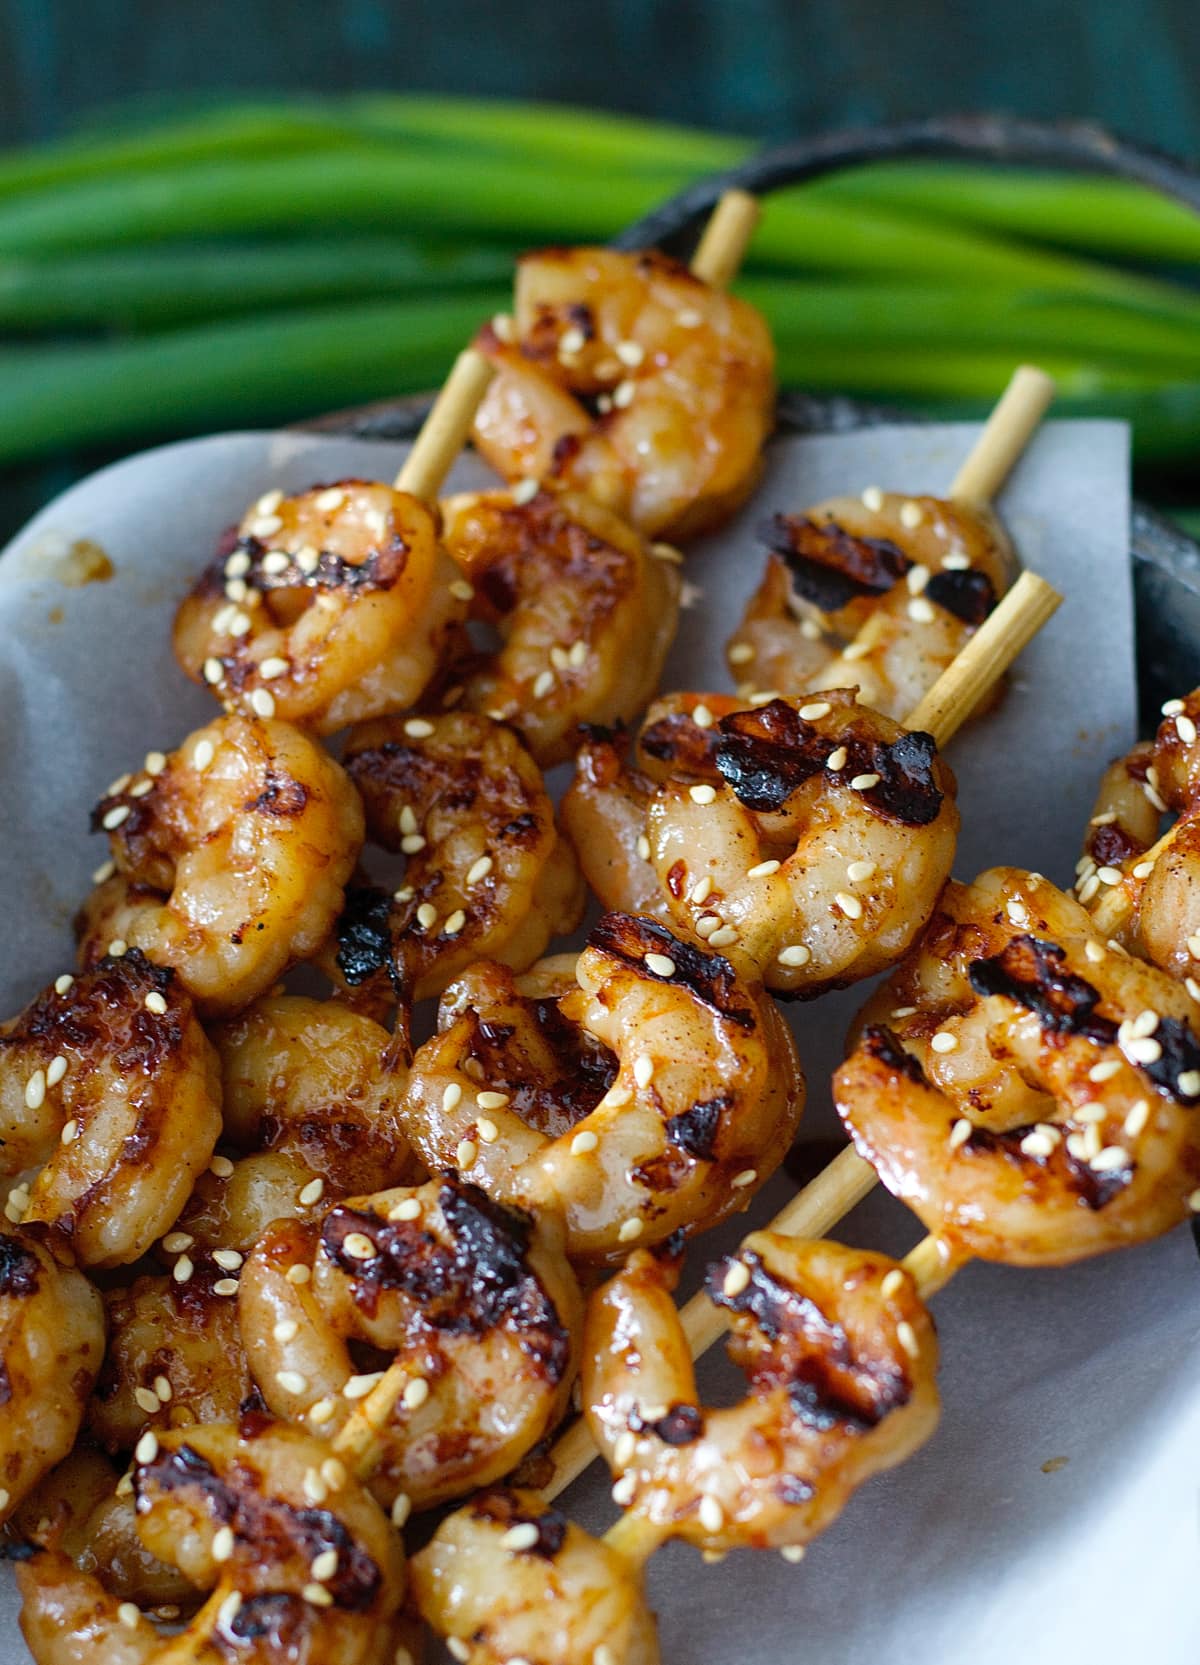 These Sesame Shrimp Skewers are the perfect dish for busy nights! Only 5 ingredients and a few minutes to make!